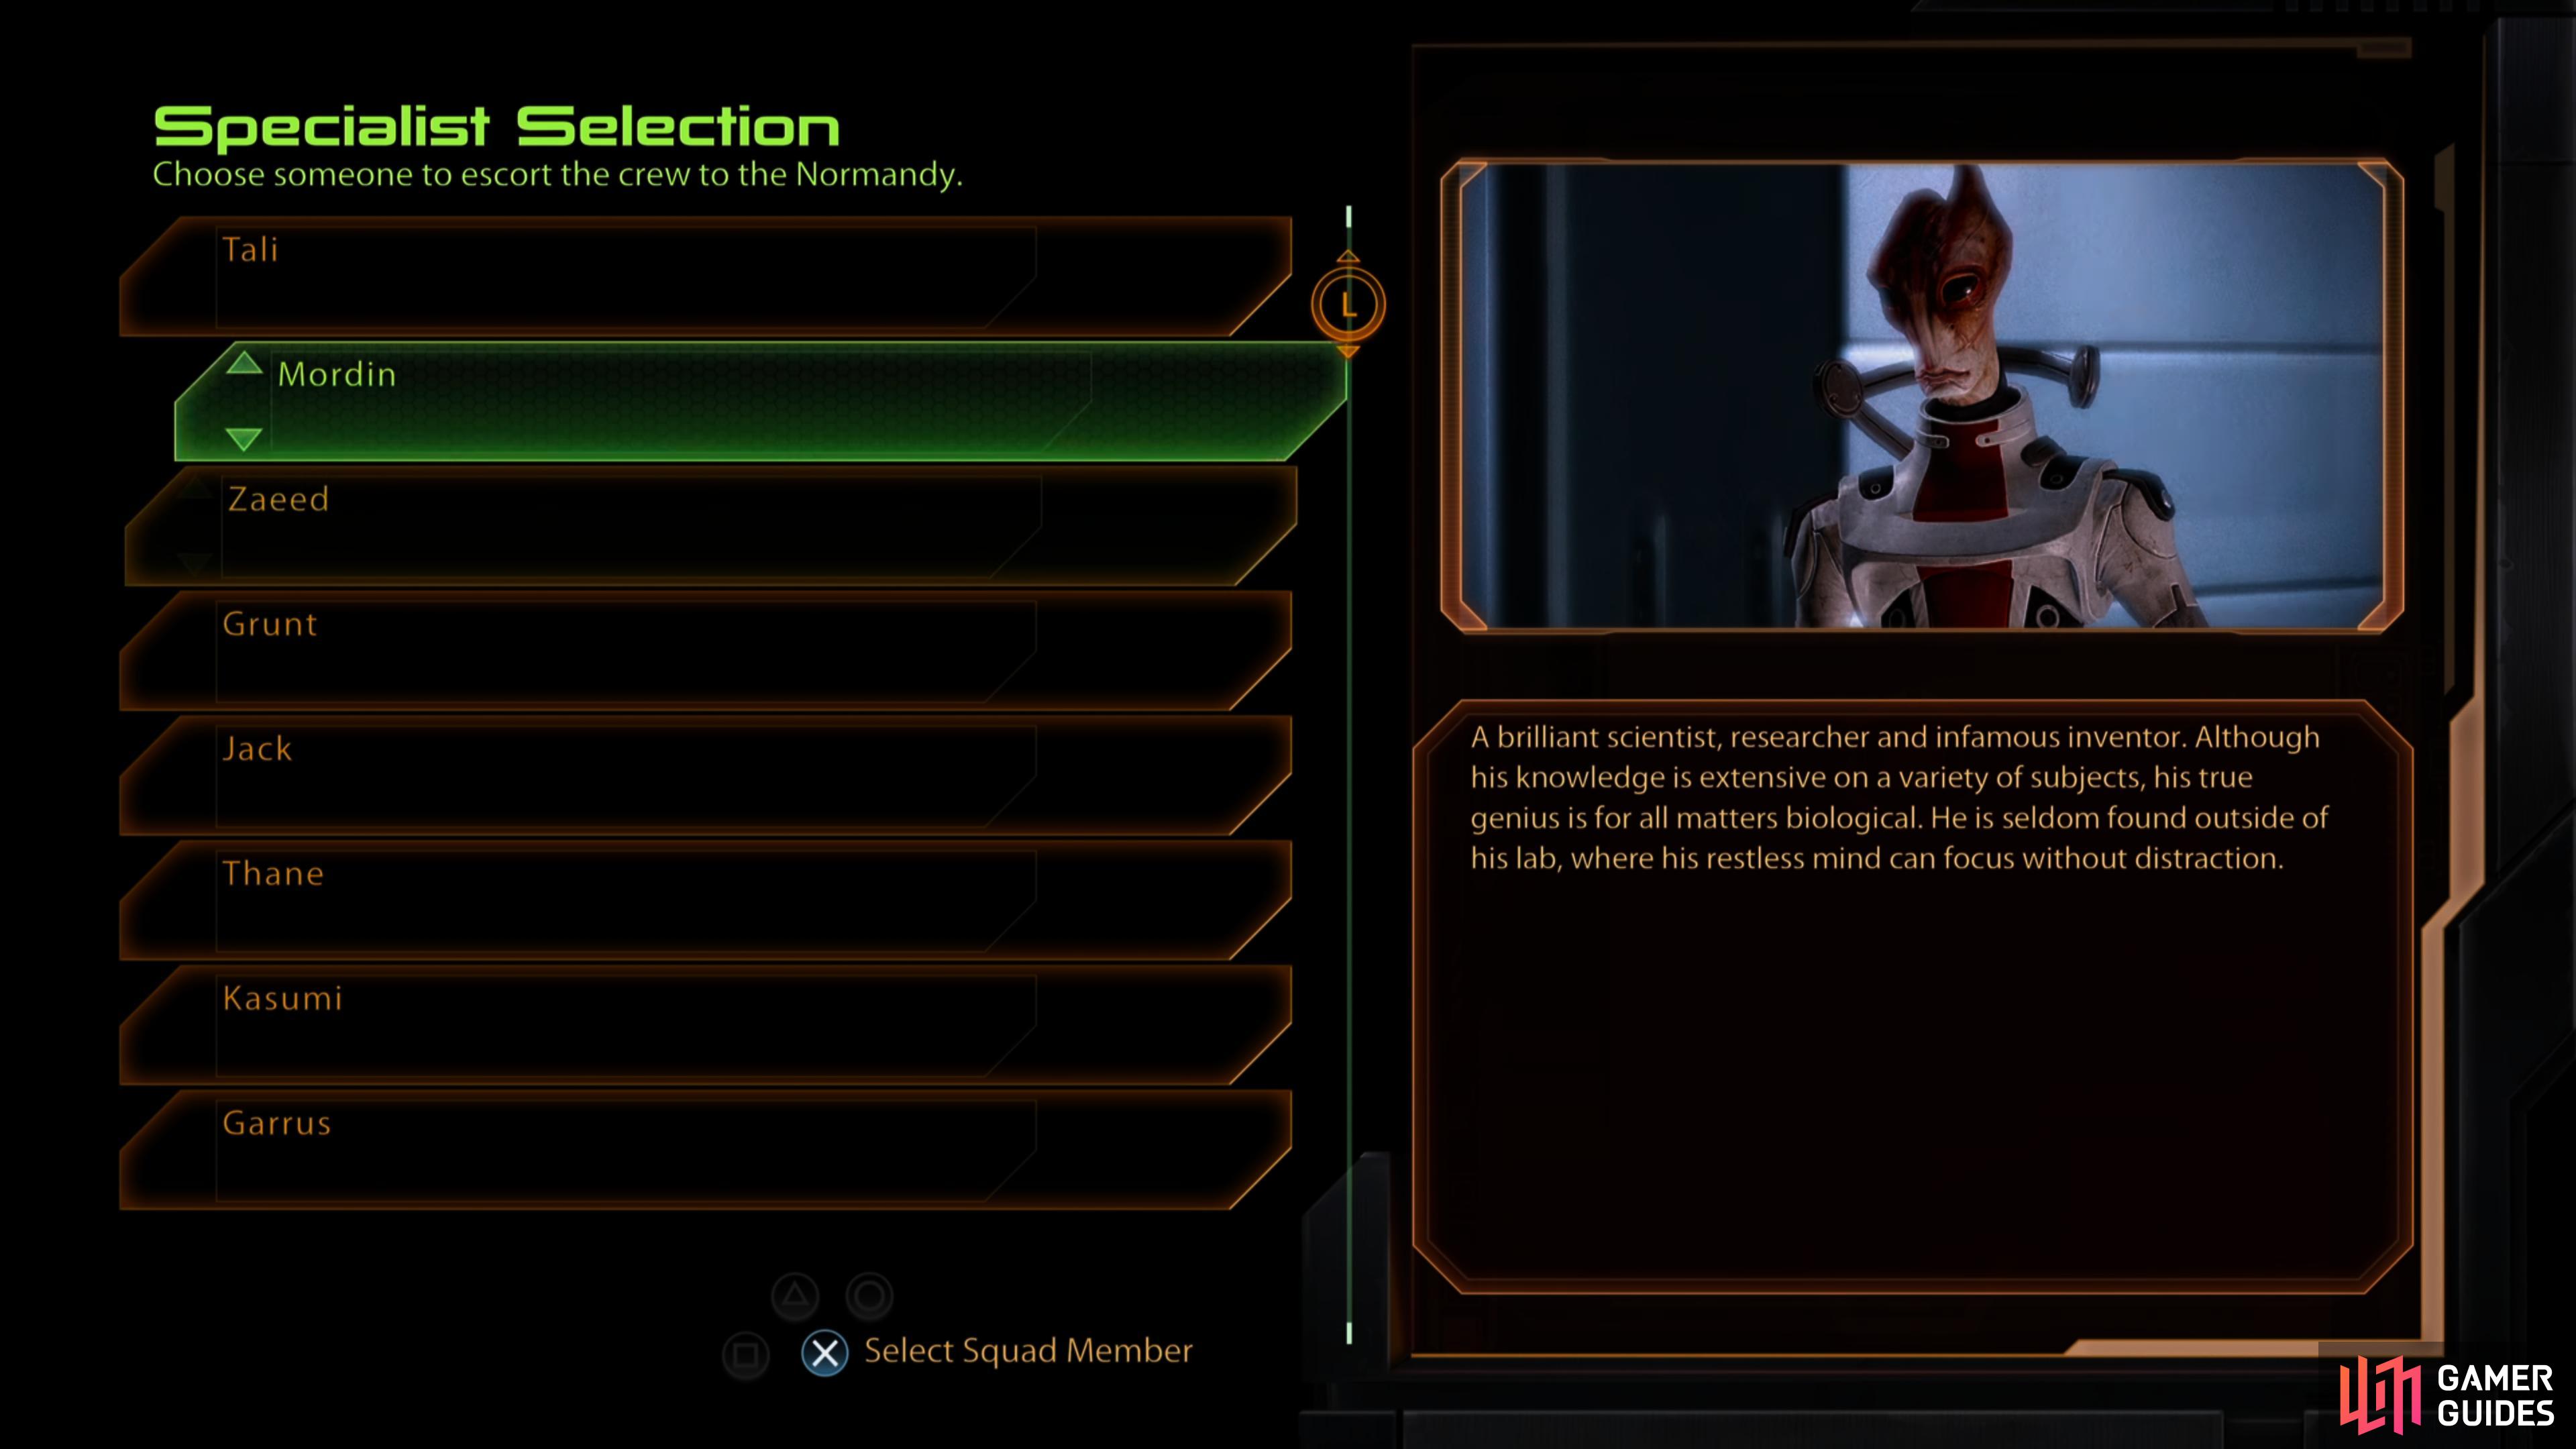 Assign an escort you won't need later - Mordin is a fine choice, provided he's loyal.